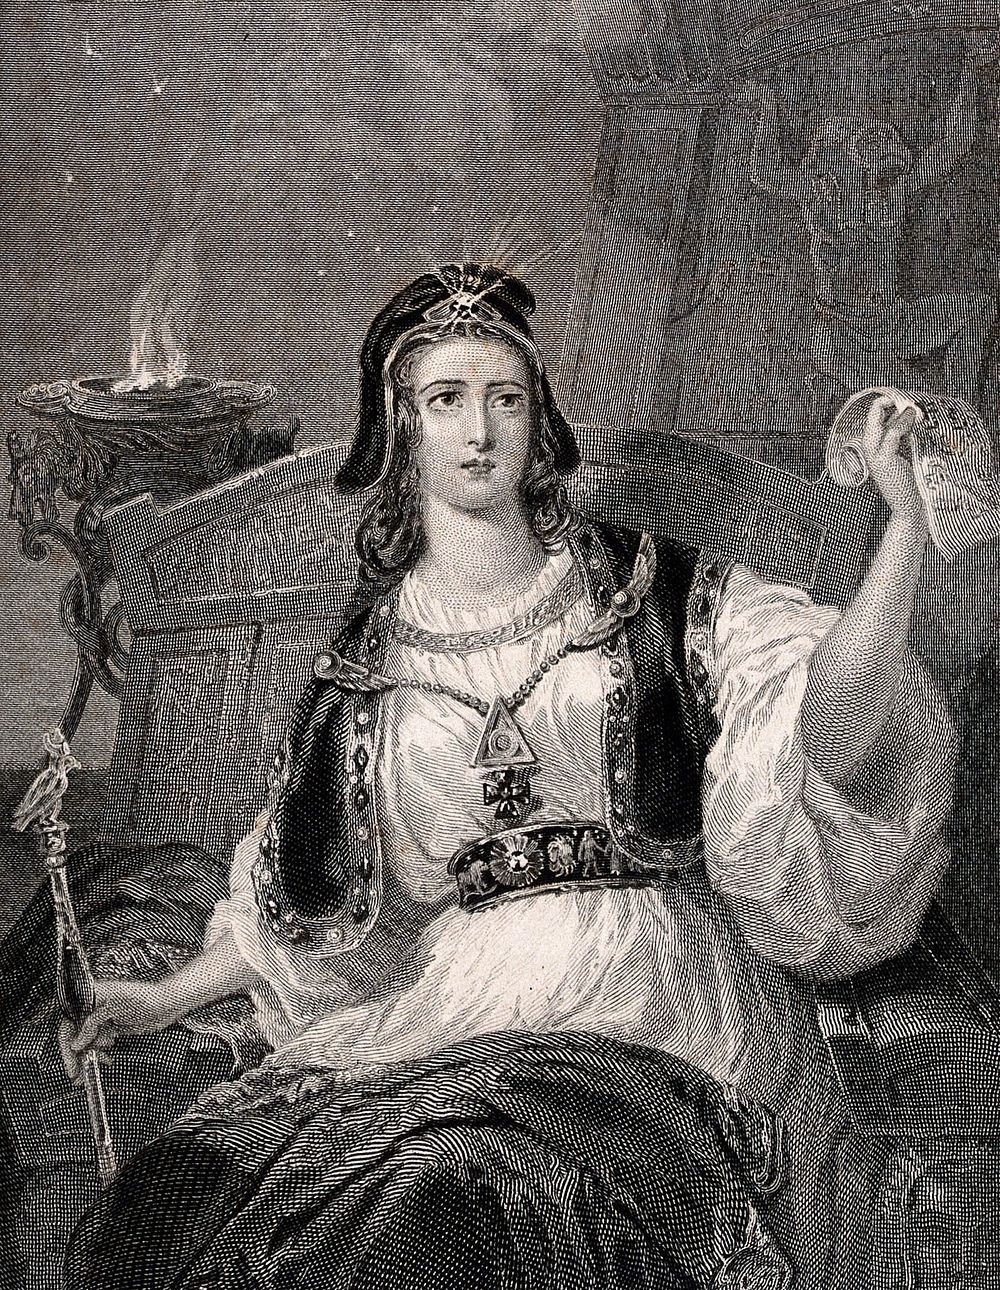 A sorceress. Engraving by G.A. Periam, 1837, after F. Corbaux.